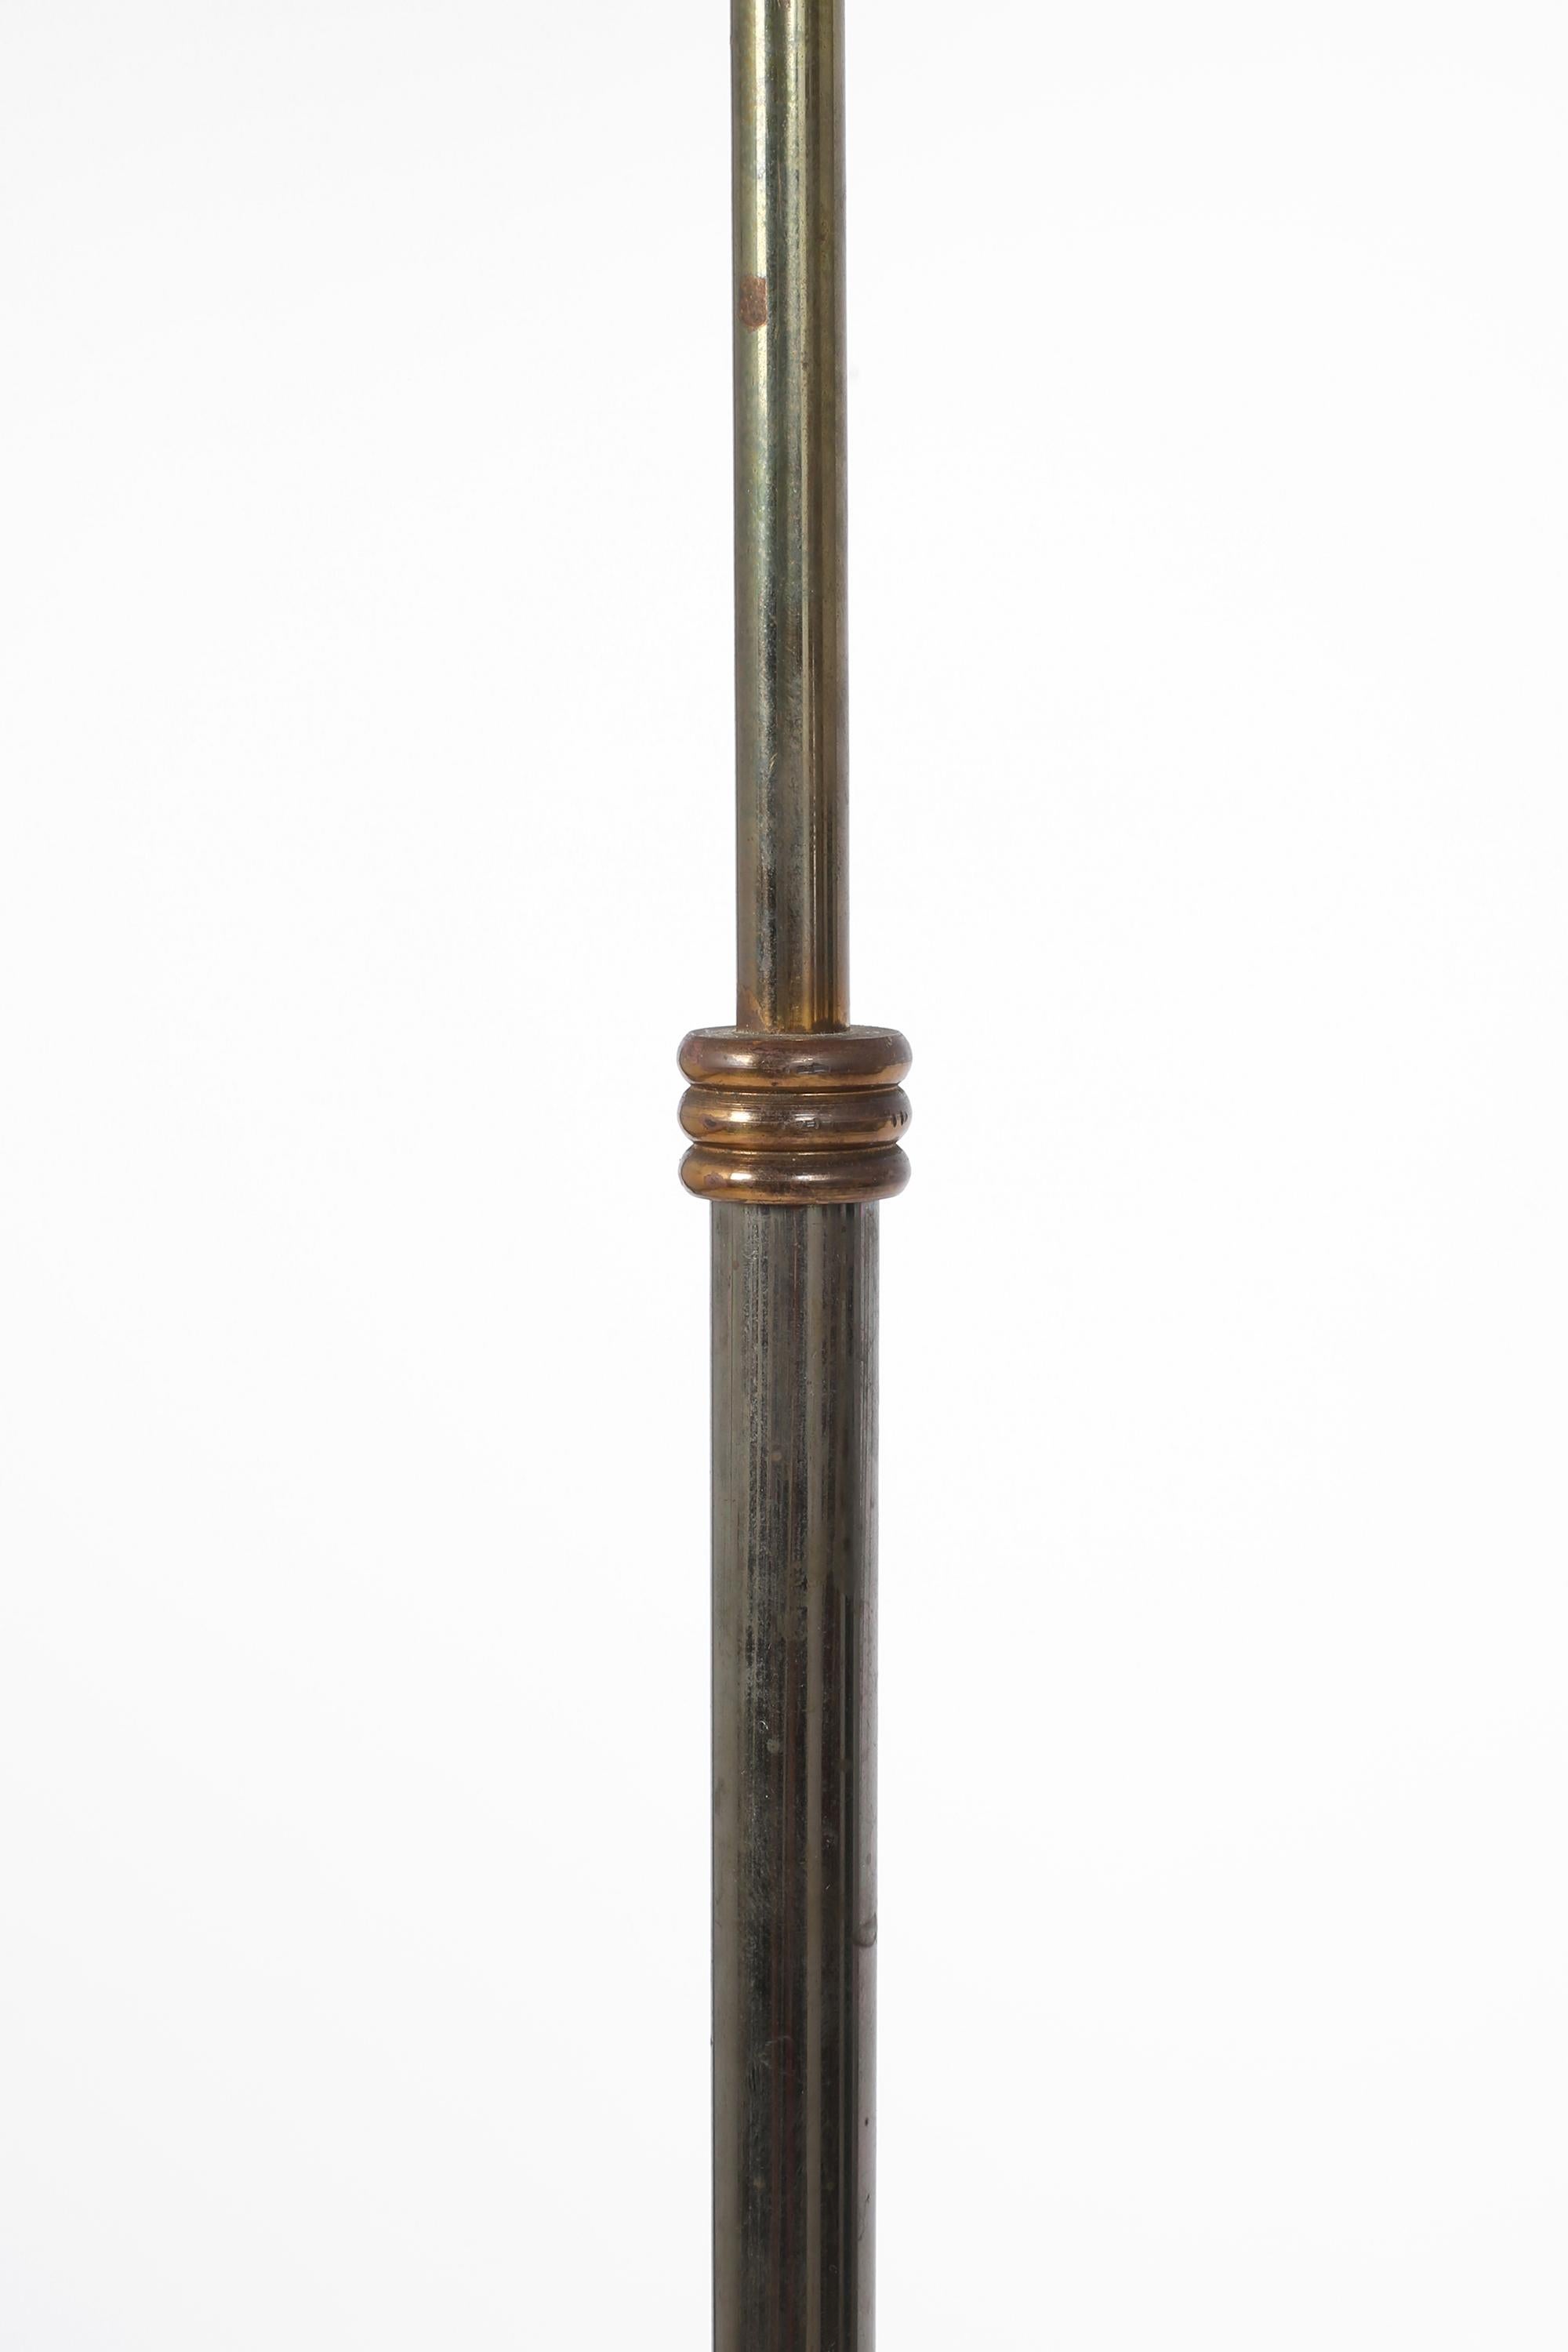 Bronze Neoclassical Floor Lamp by Henri Petitot for Atelier Petitot, French, c. 1930s For Sale